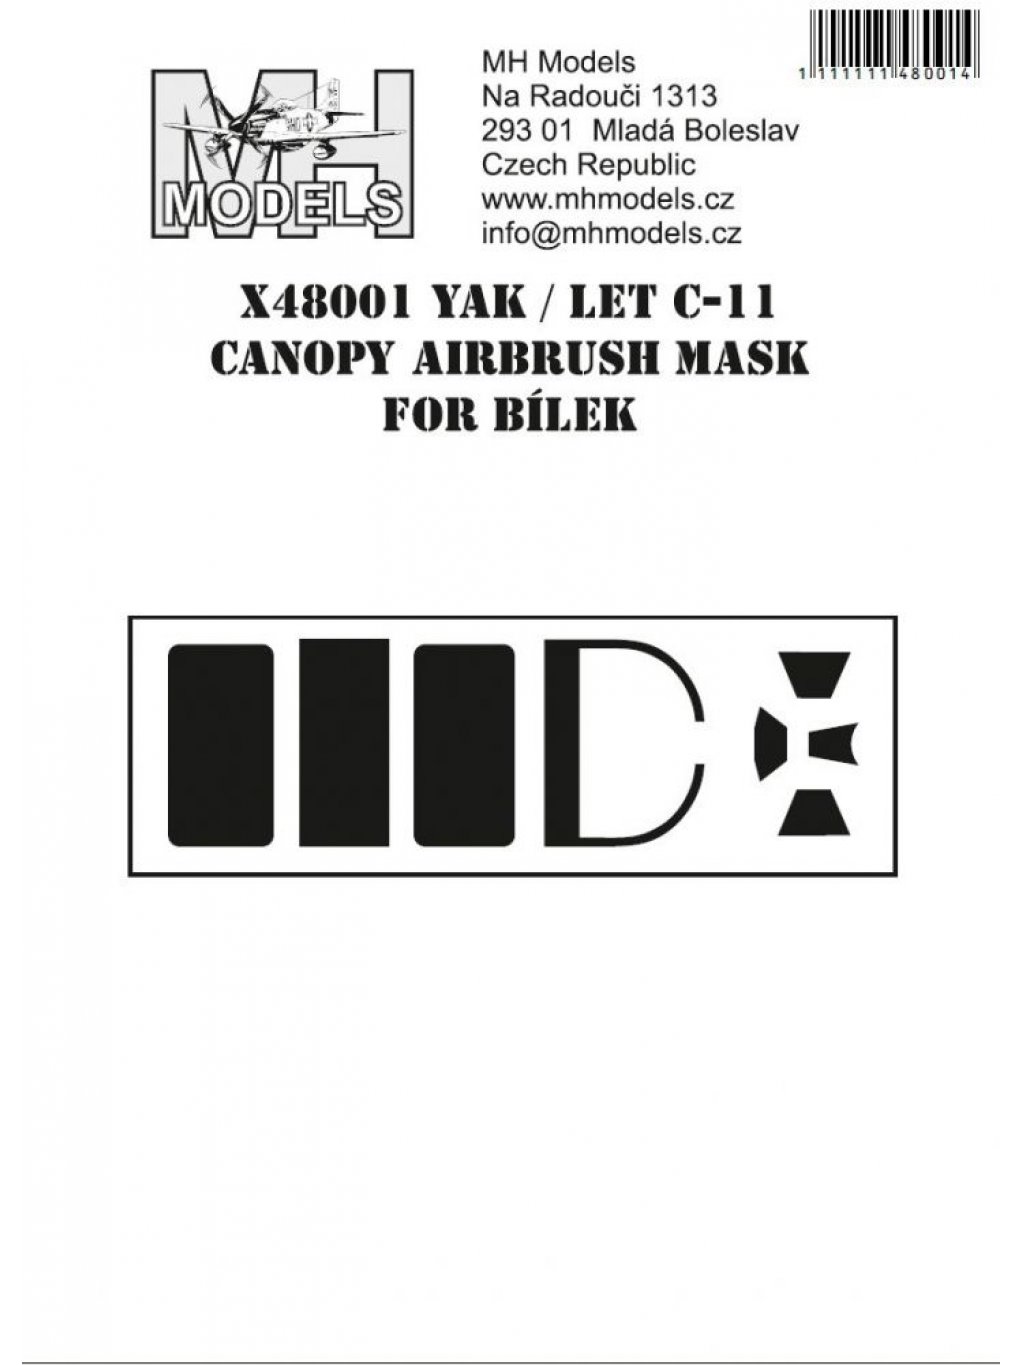 Let C-11 Canopy Mask